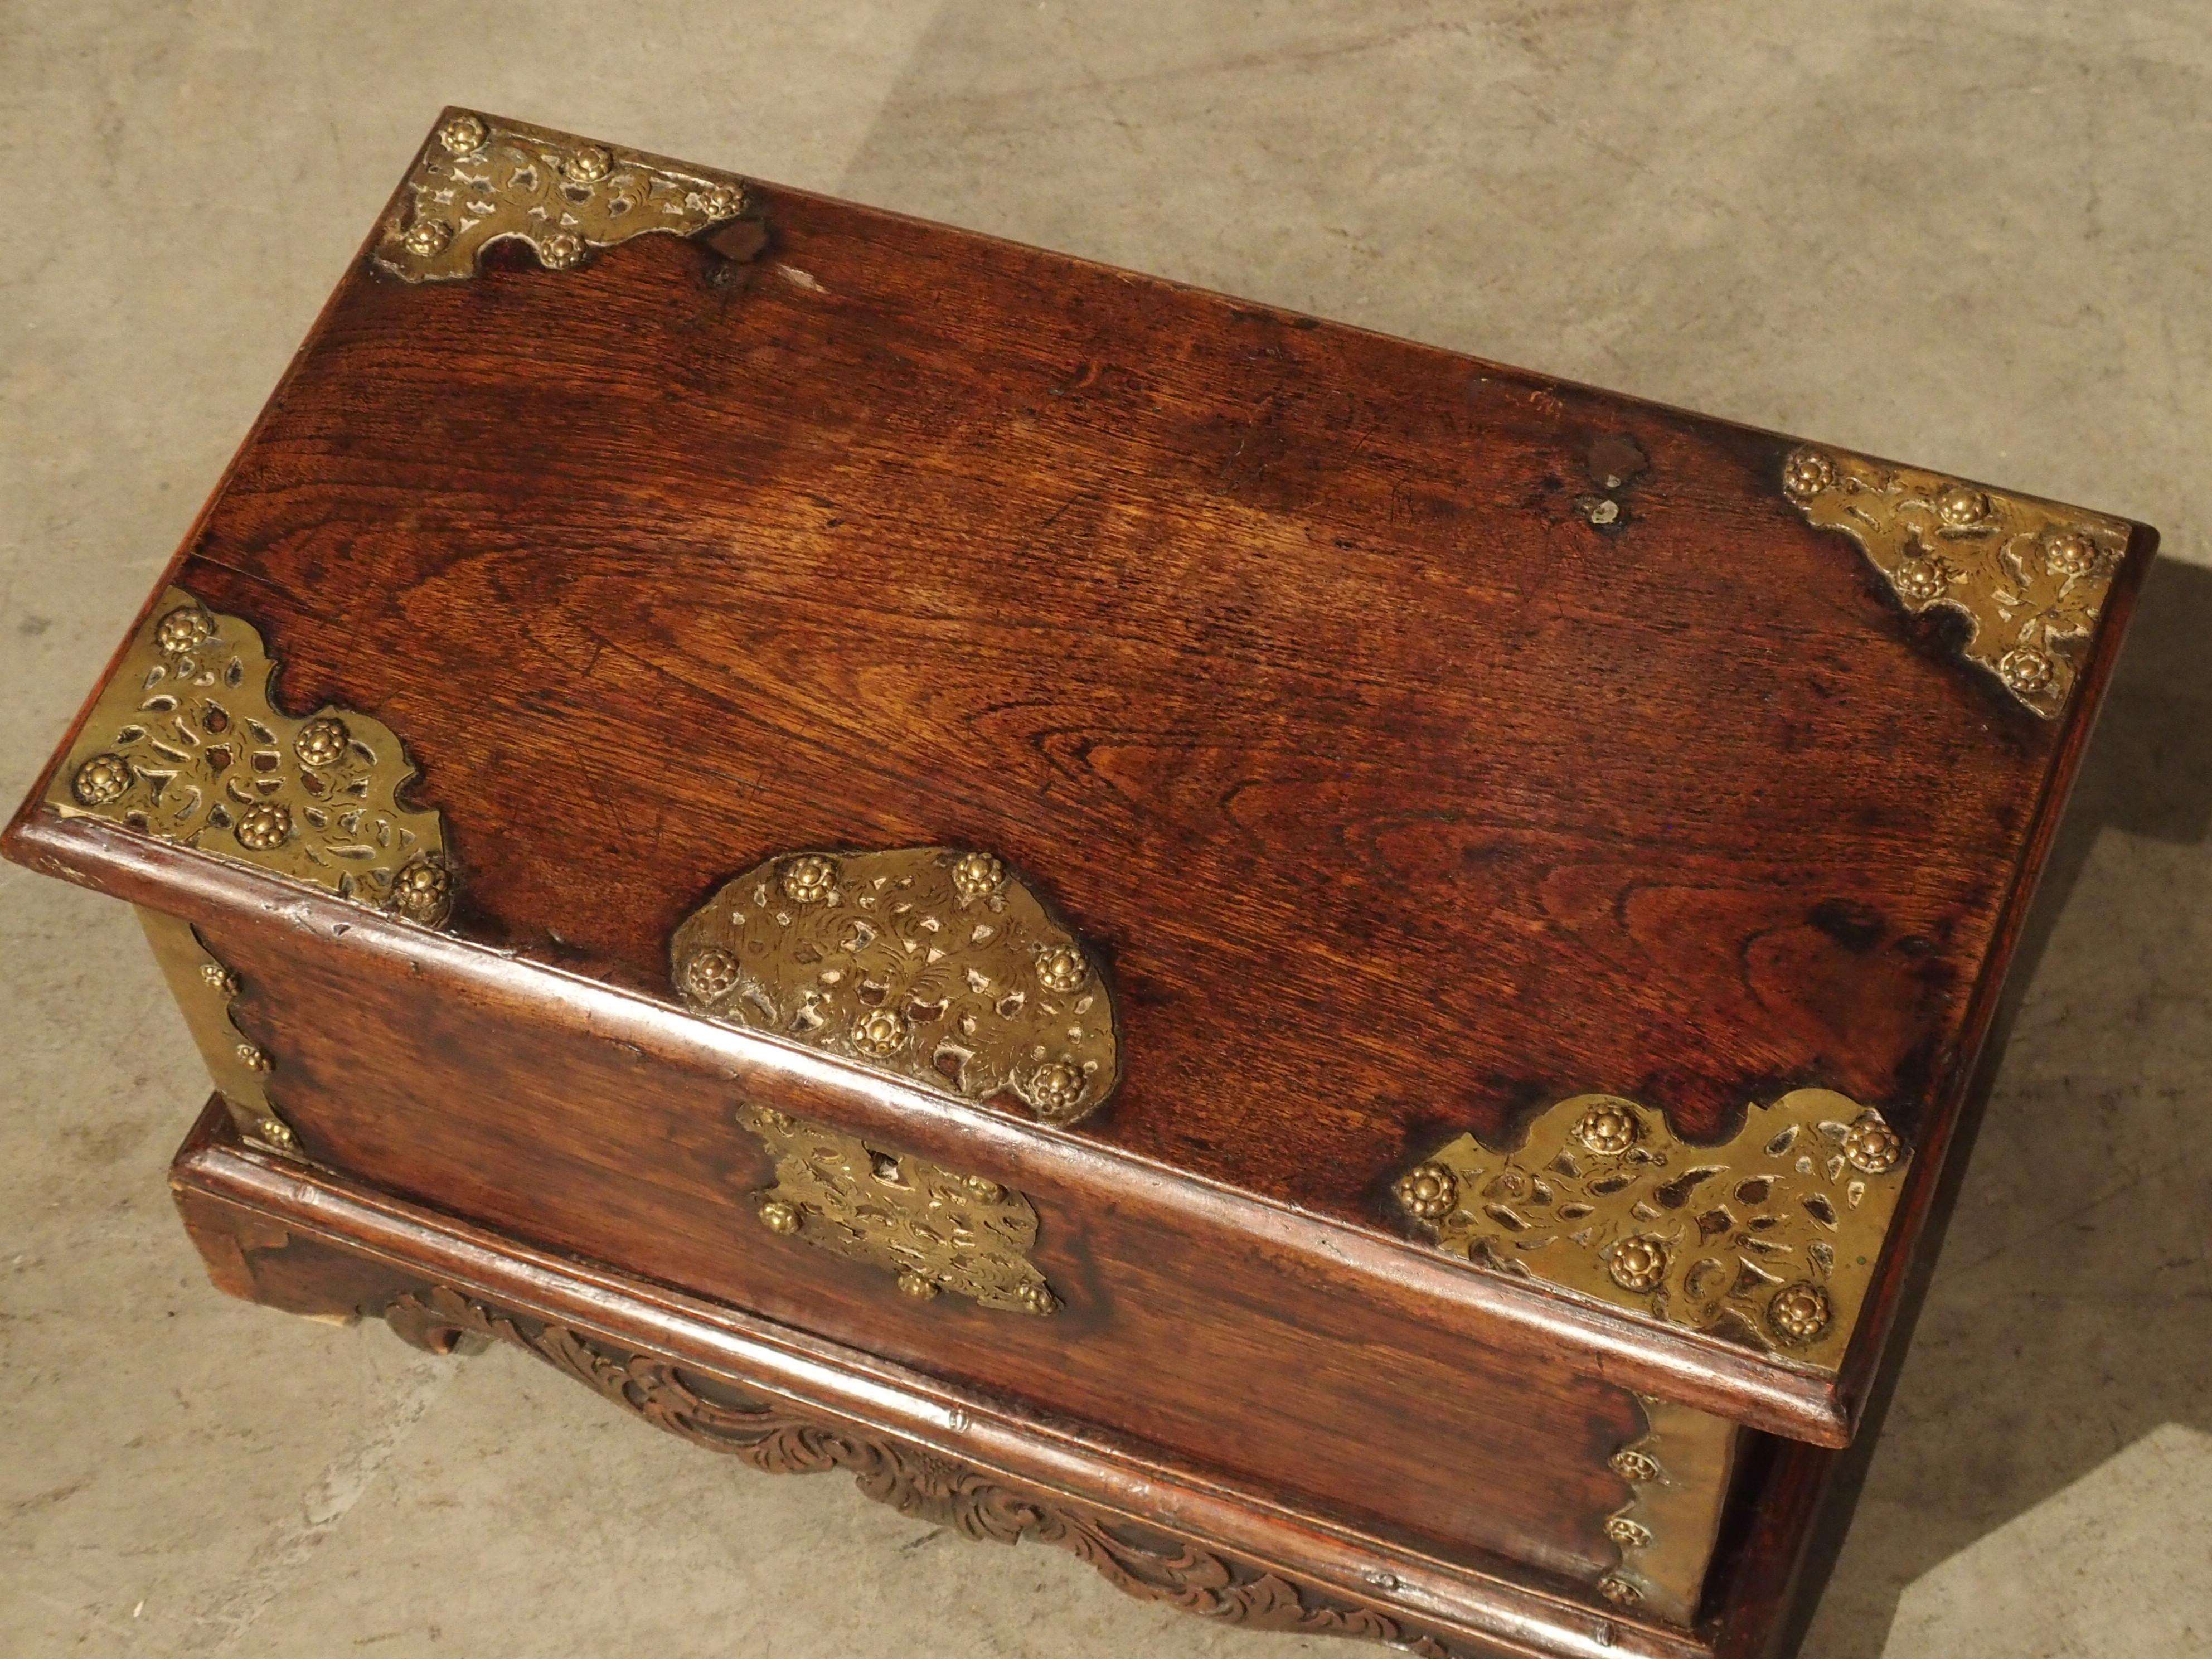 Hand-Carved Small 18th Century Dutch Colonial Documents Trunk with Brass Mounts